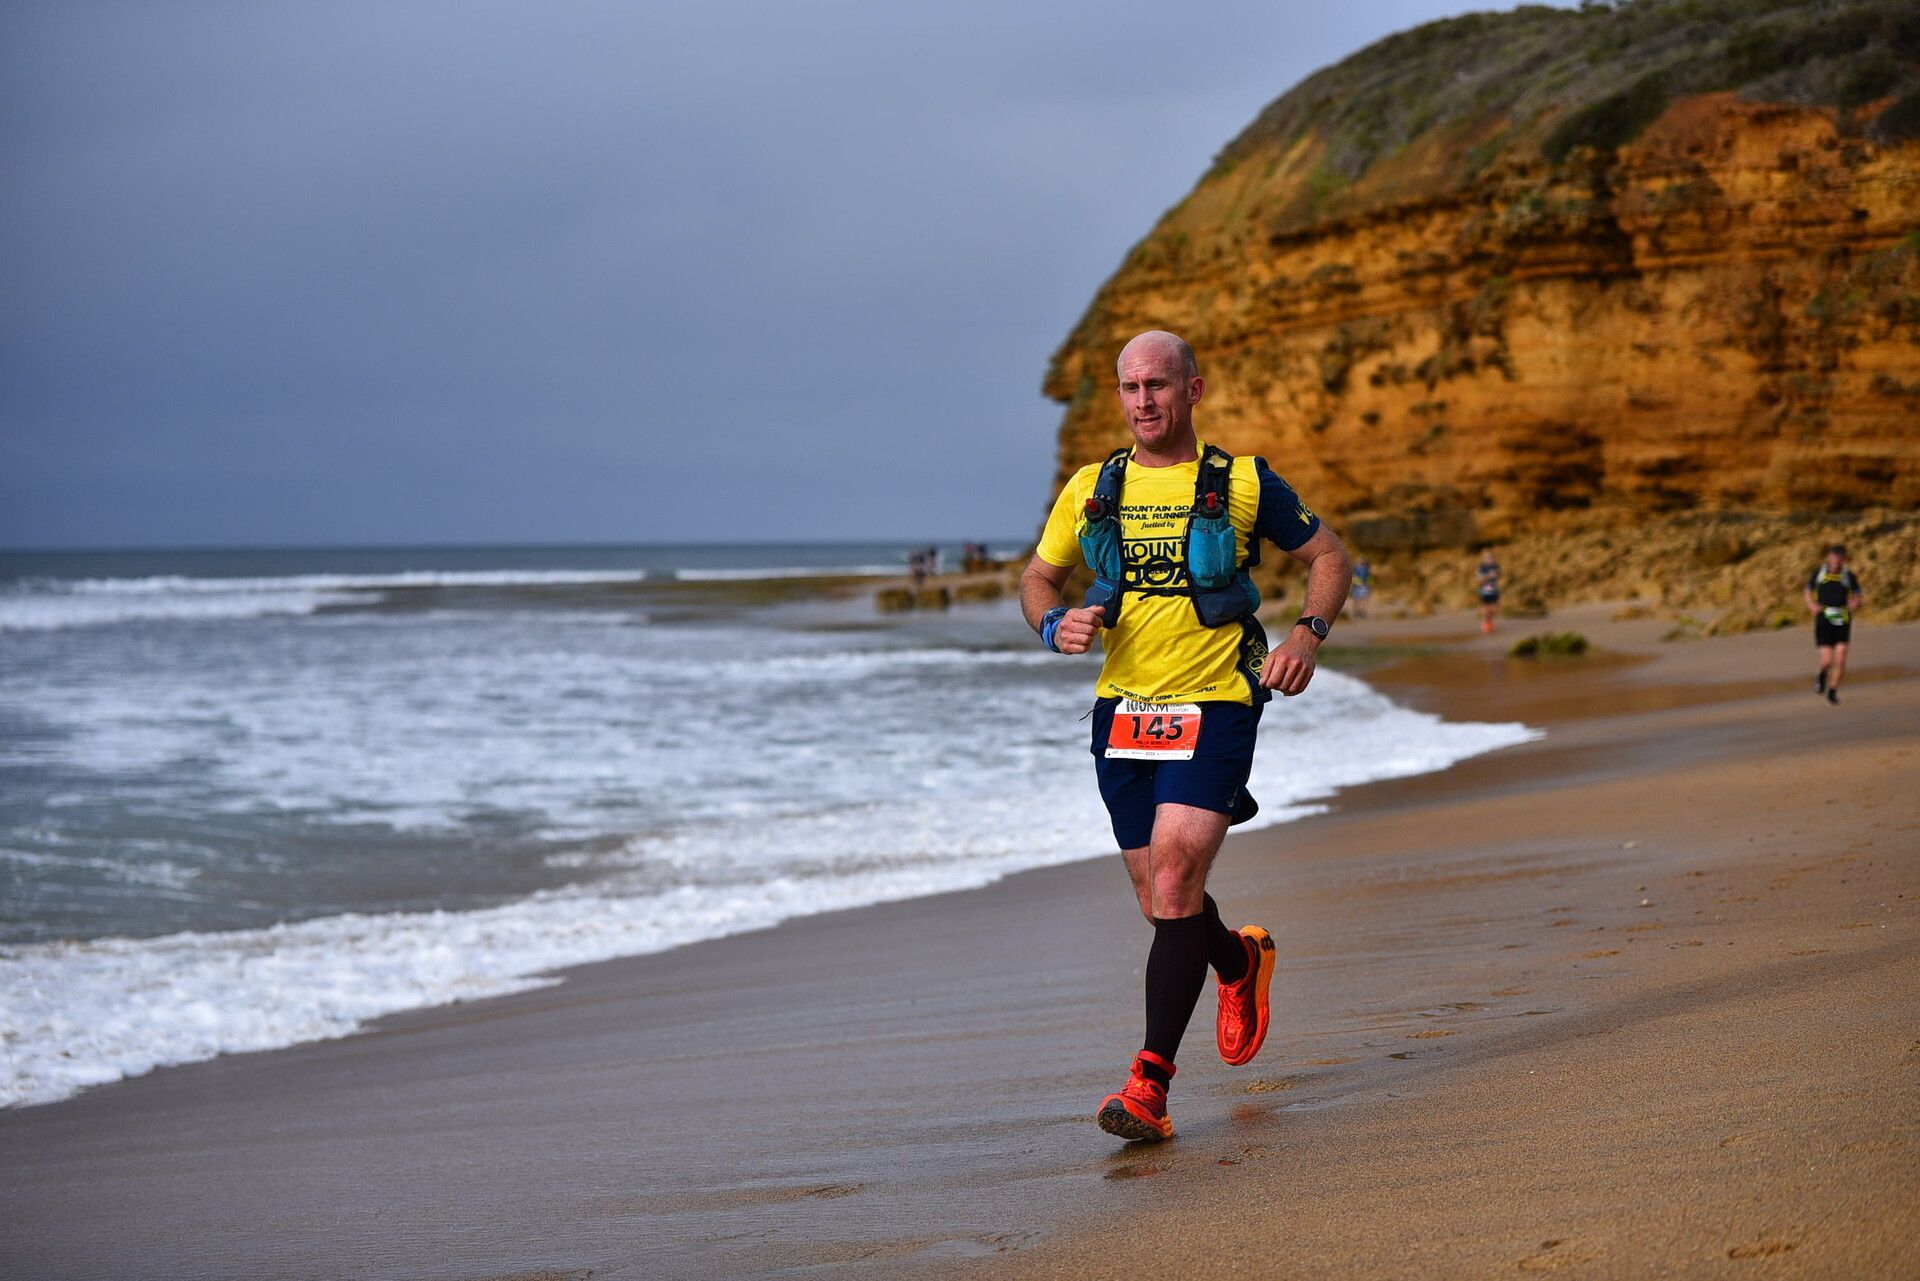 50km and 100km trail run incorporating coastal and hinterland trails and beaches set in an iconic location